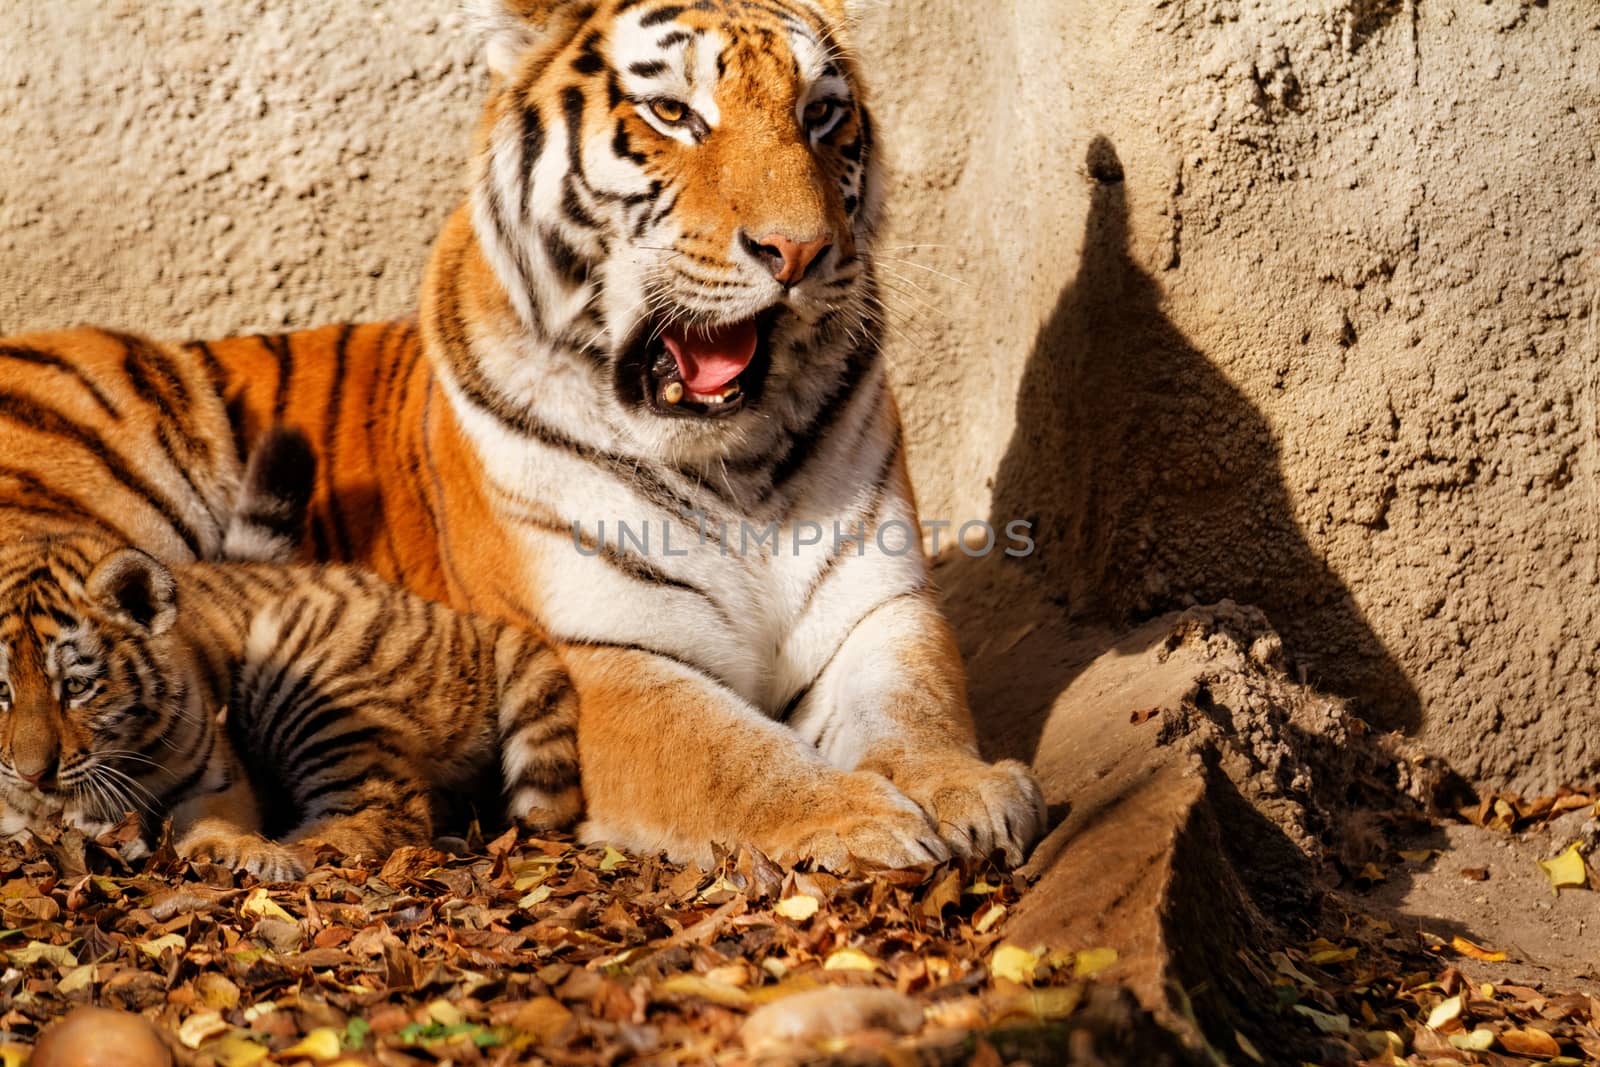 The tiger mum in the zoo with her tiger cub - sunny photo